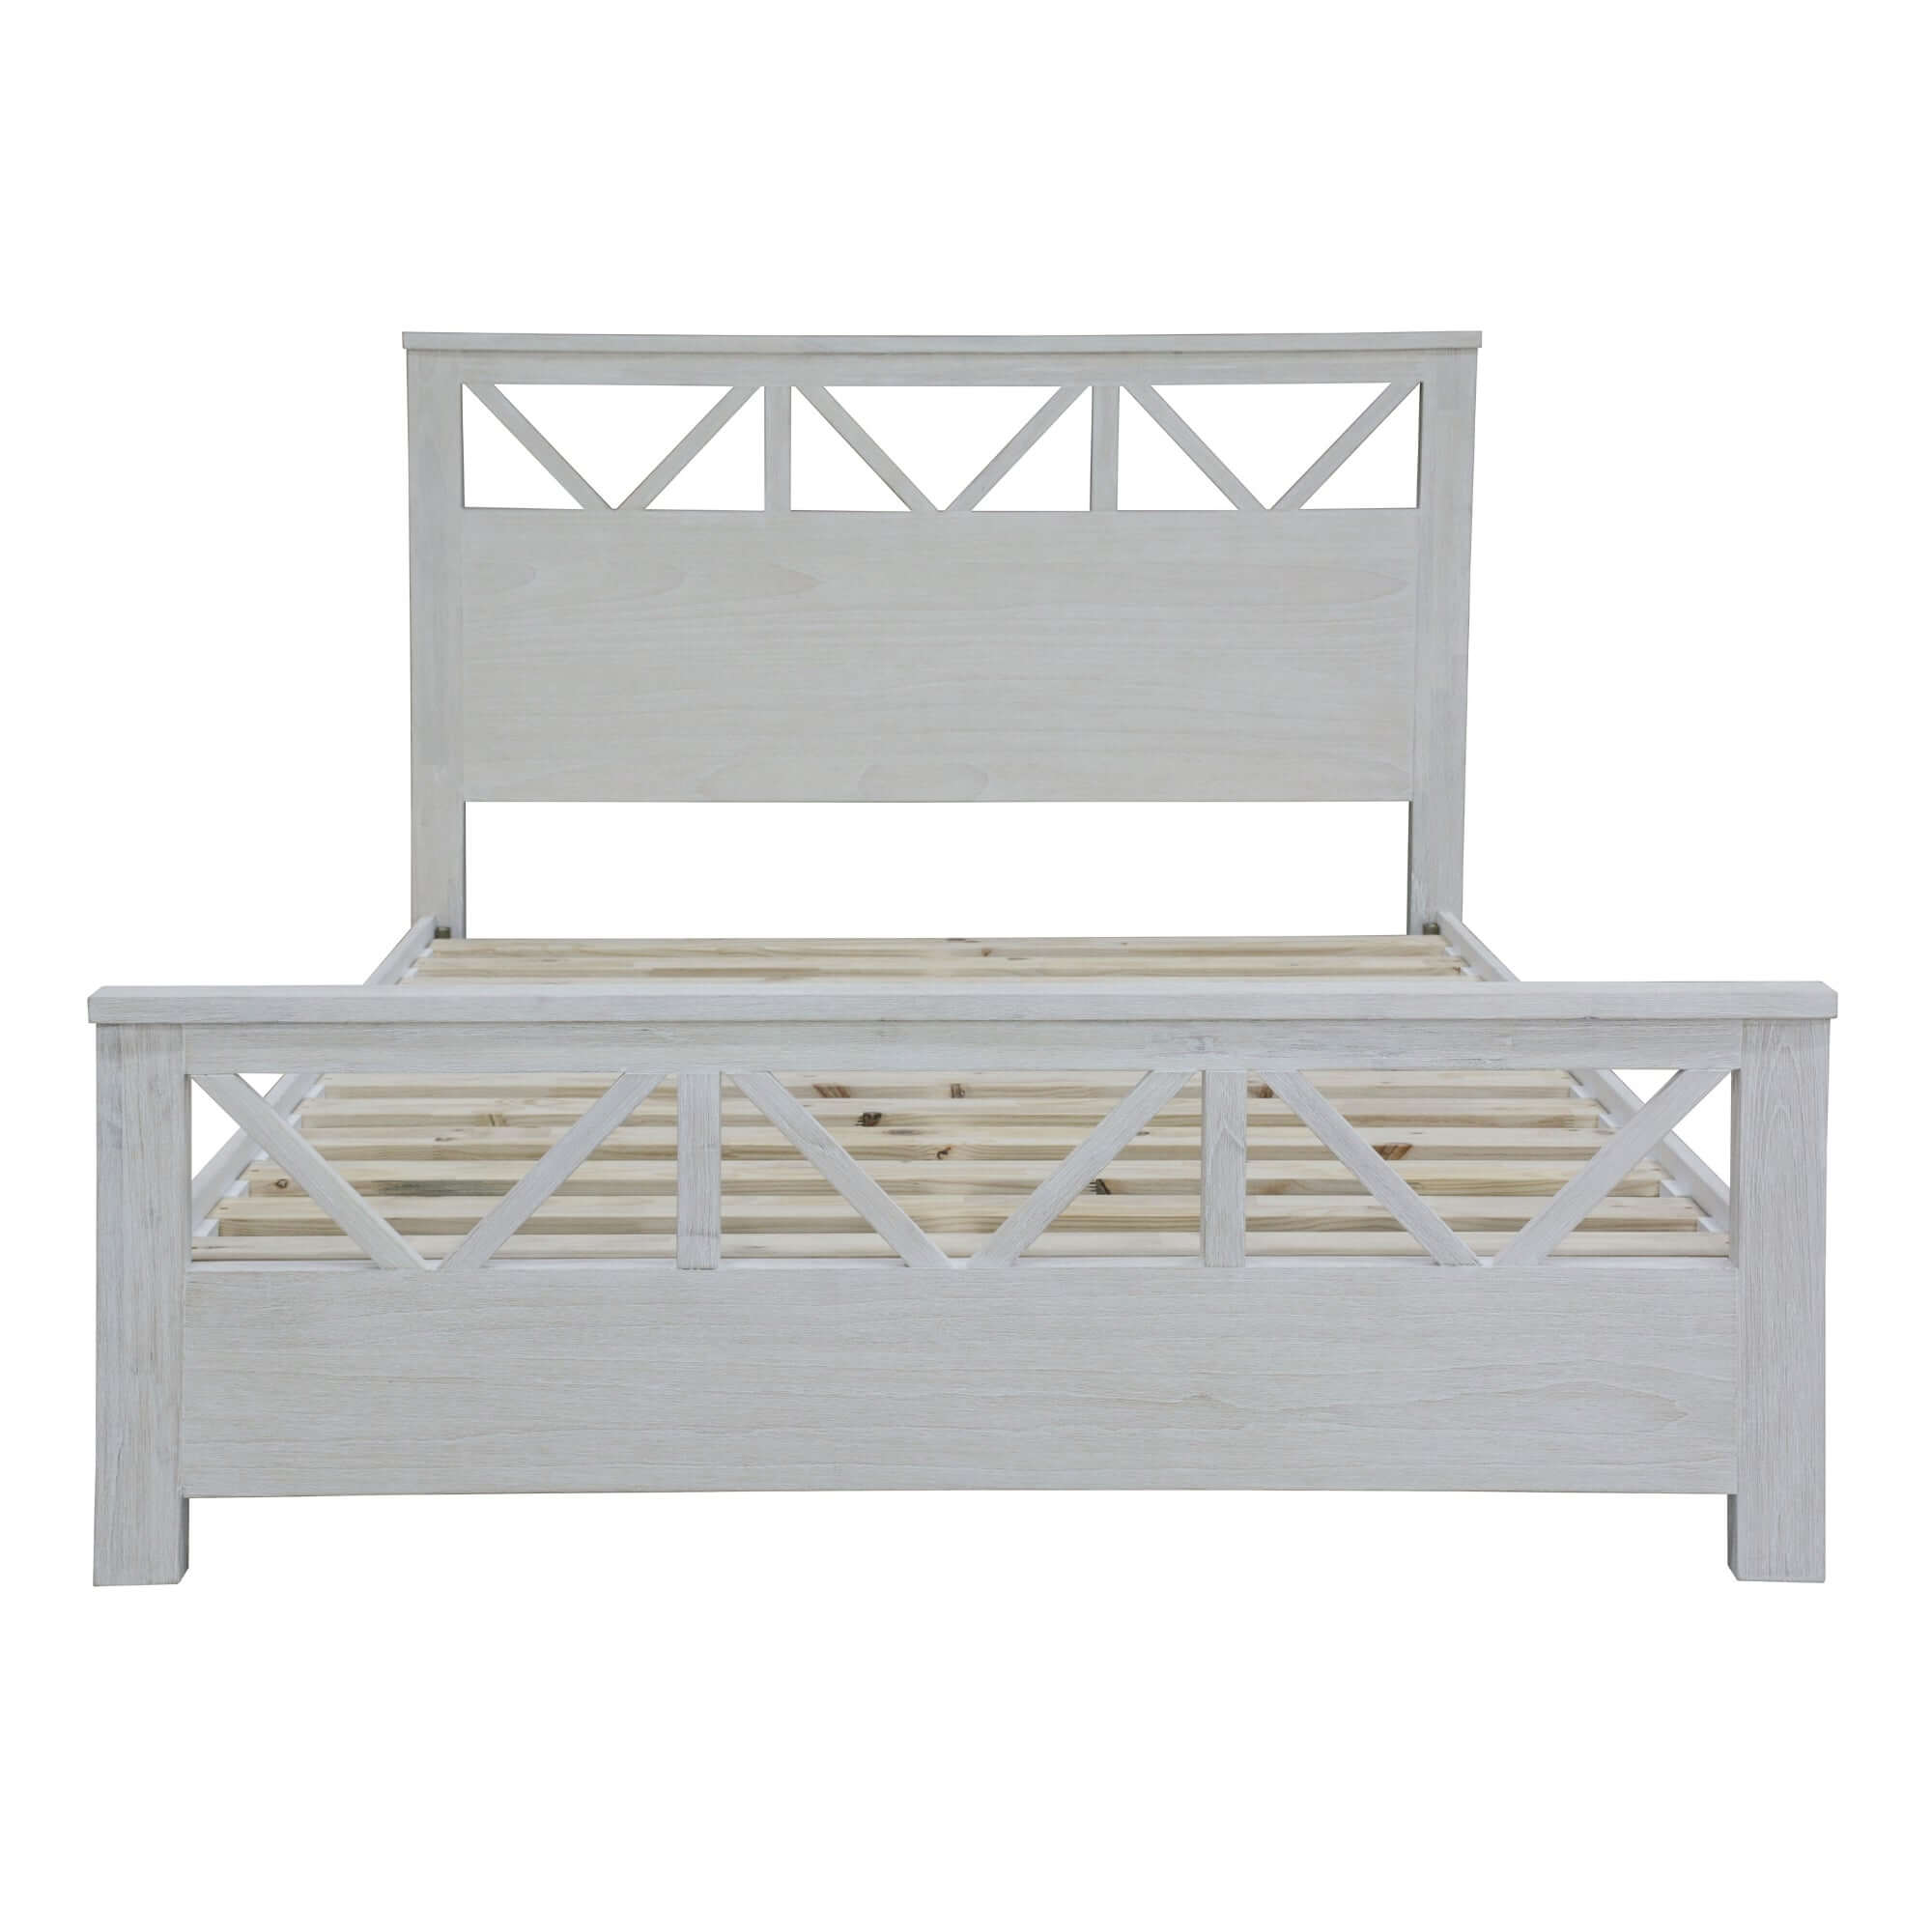 Solid Timber Double Bed Frame - White Wash Finish-Upinteriors